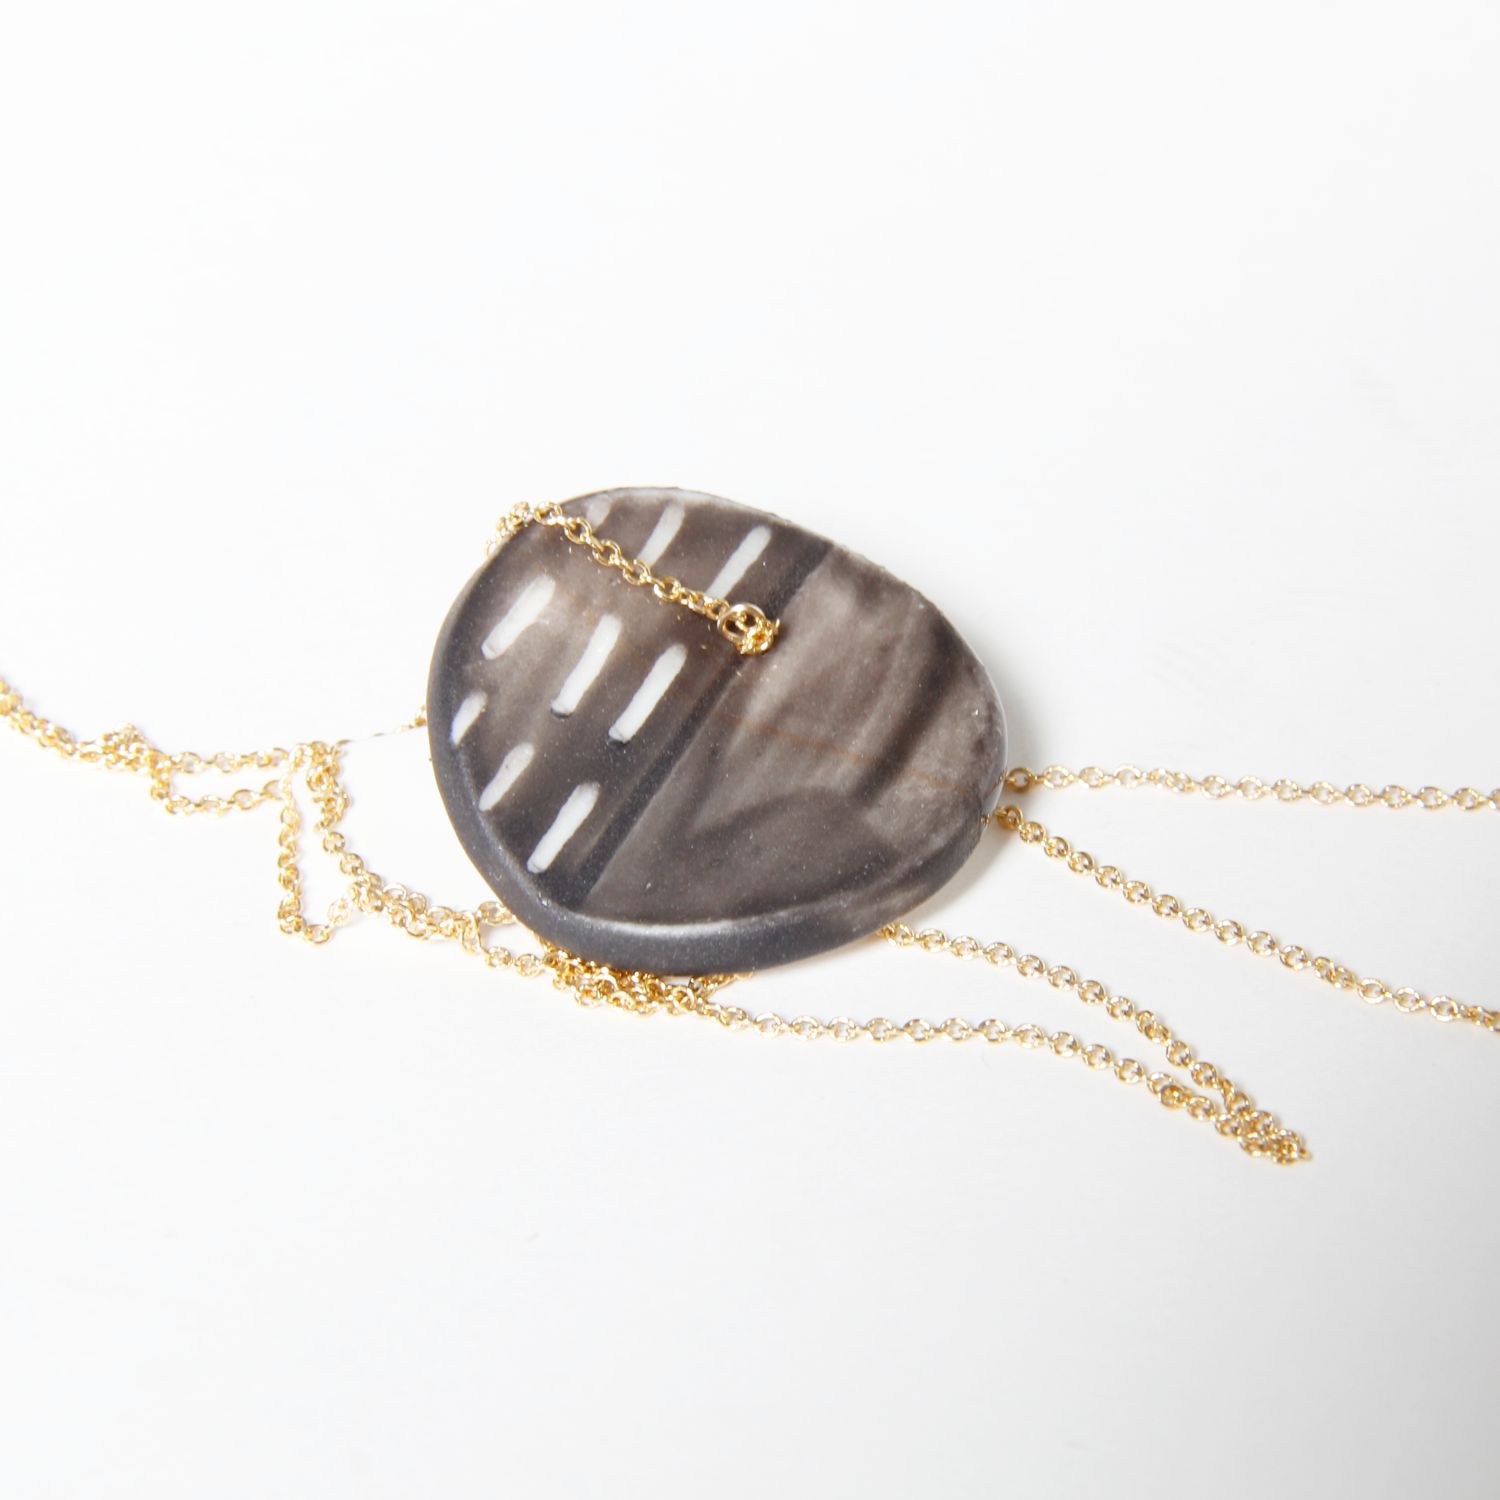 Chayle Jewellery: Eucalyptus Porcelain Large Double Pendant Black Wash Yellow Gold-Fill Product Image 3 of 4